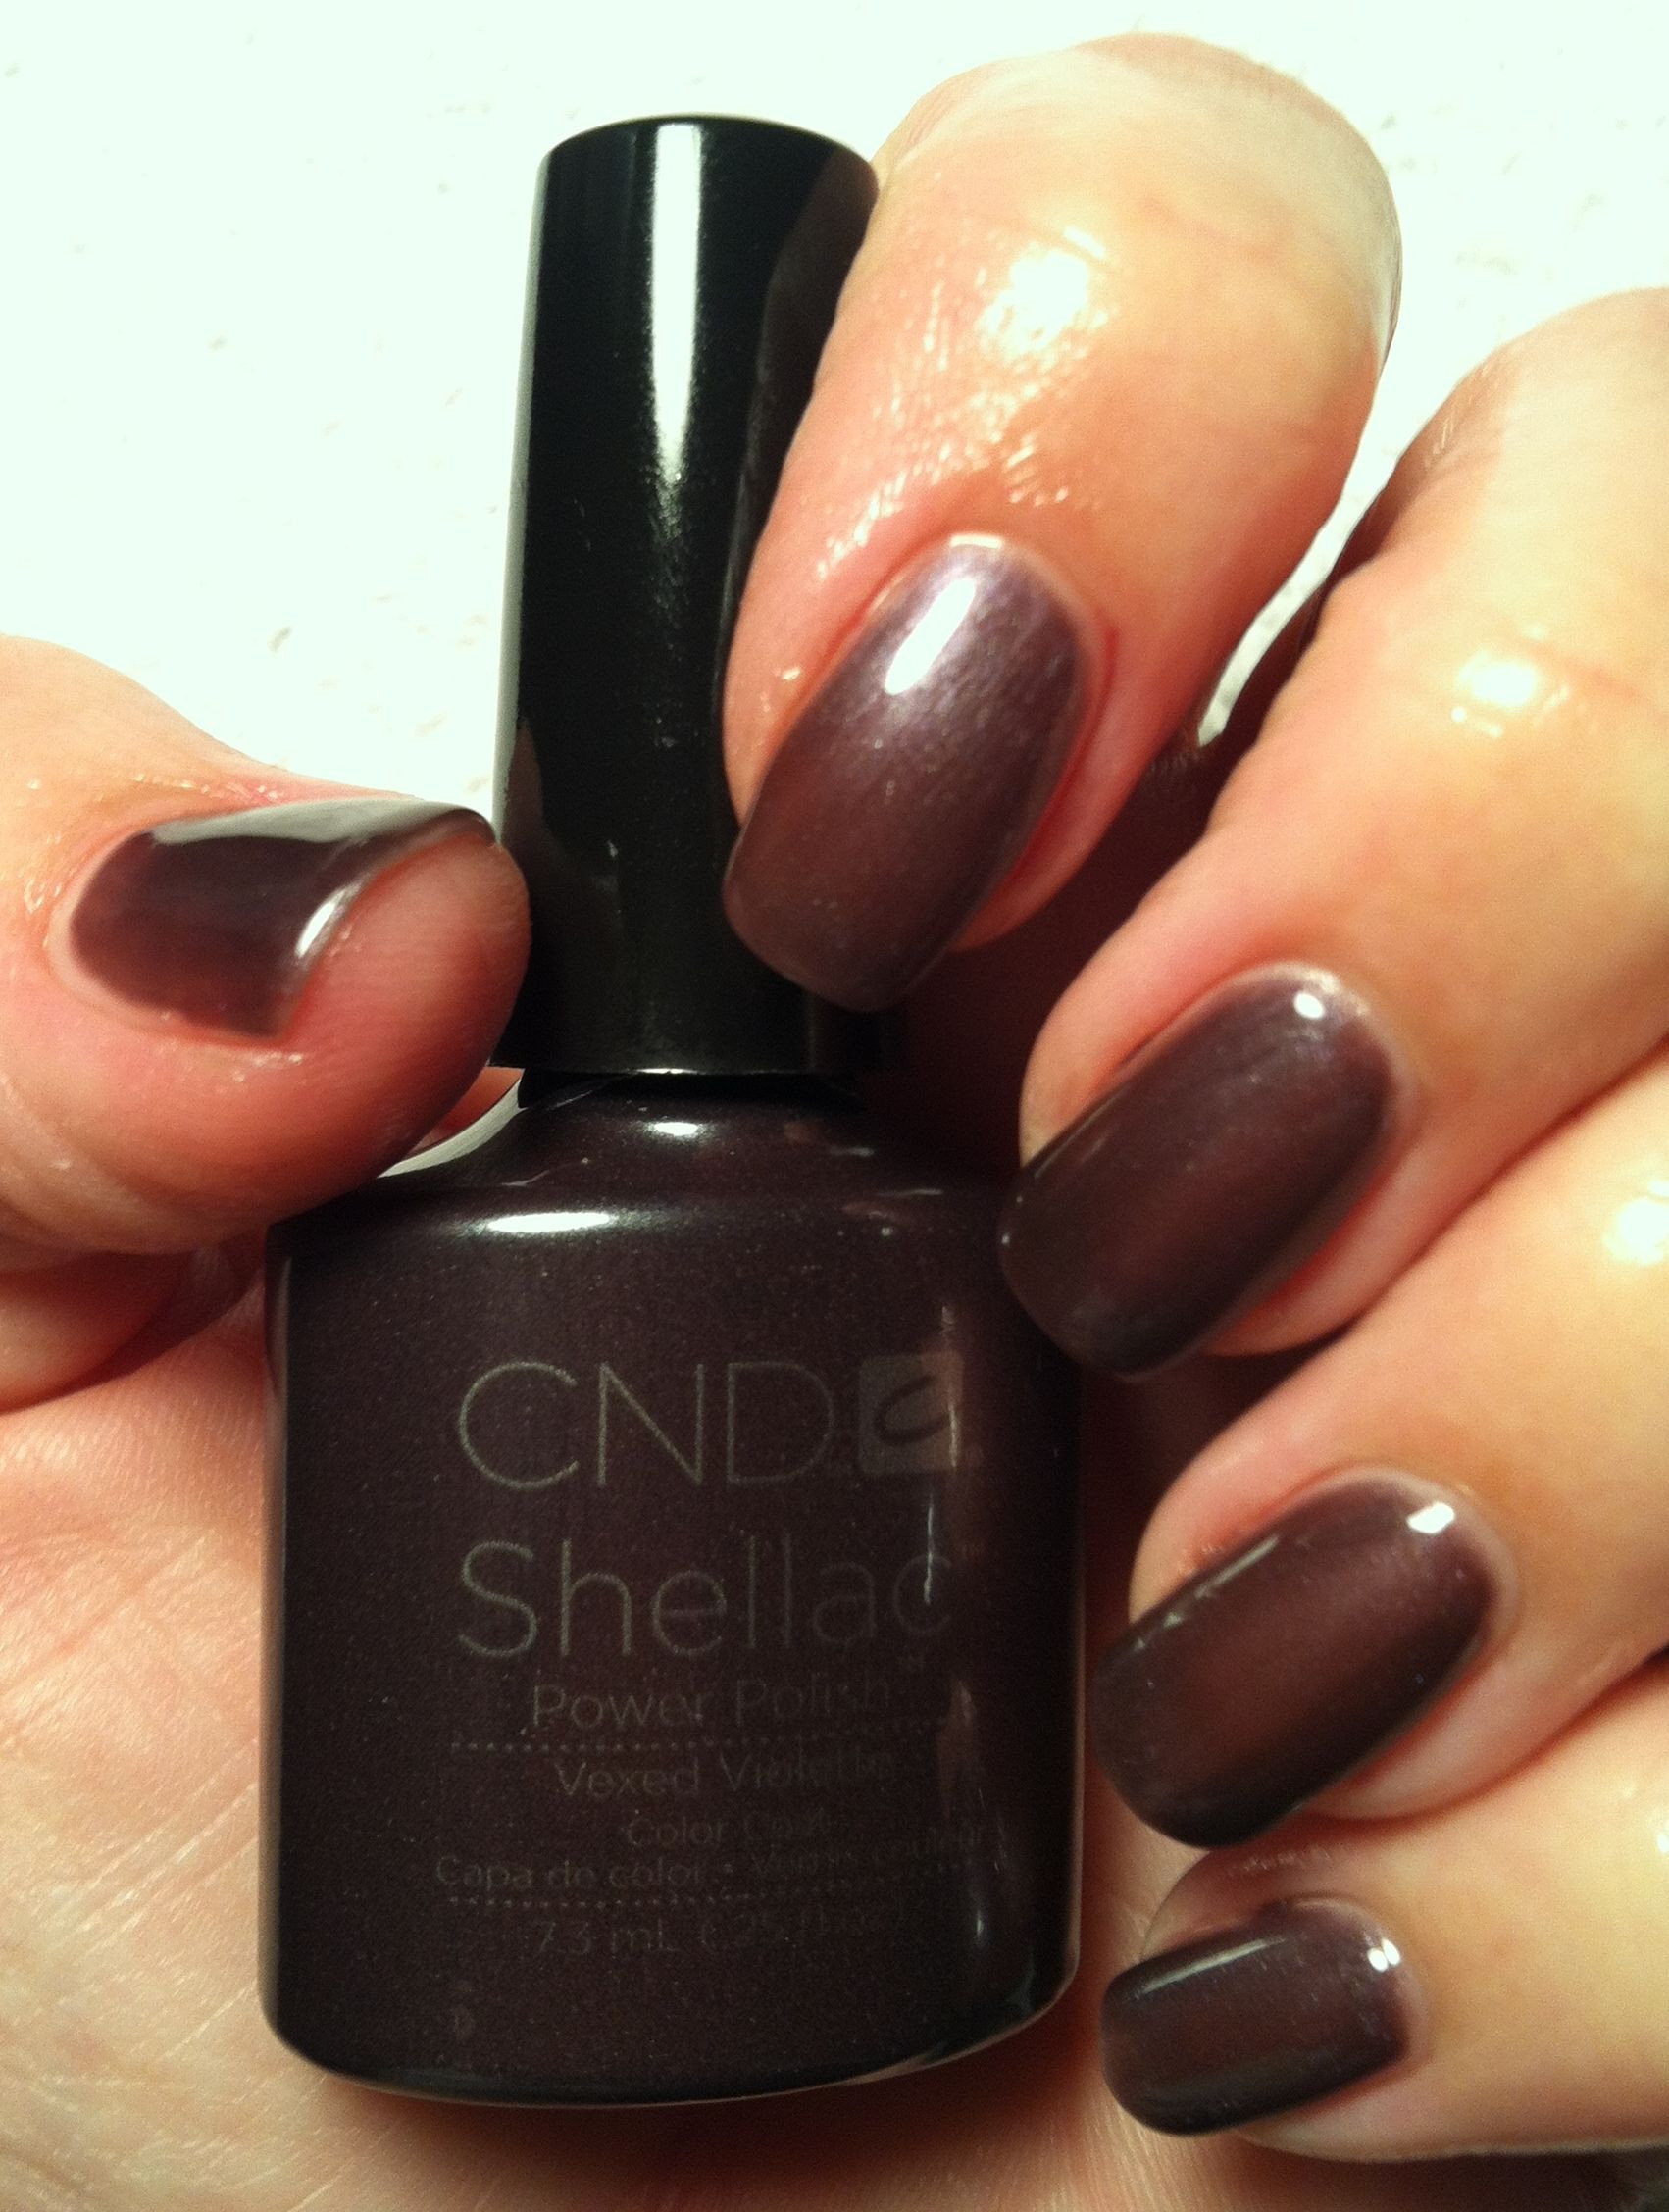 Fall Shellac Nail Colors
 CND Shellac New fall color Vexed Violette Gorgeous in